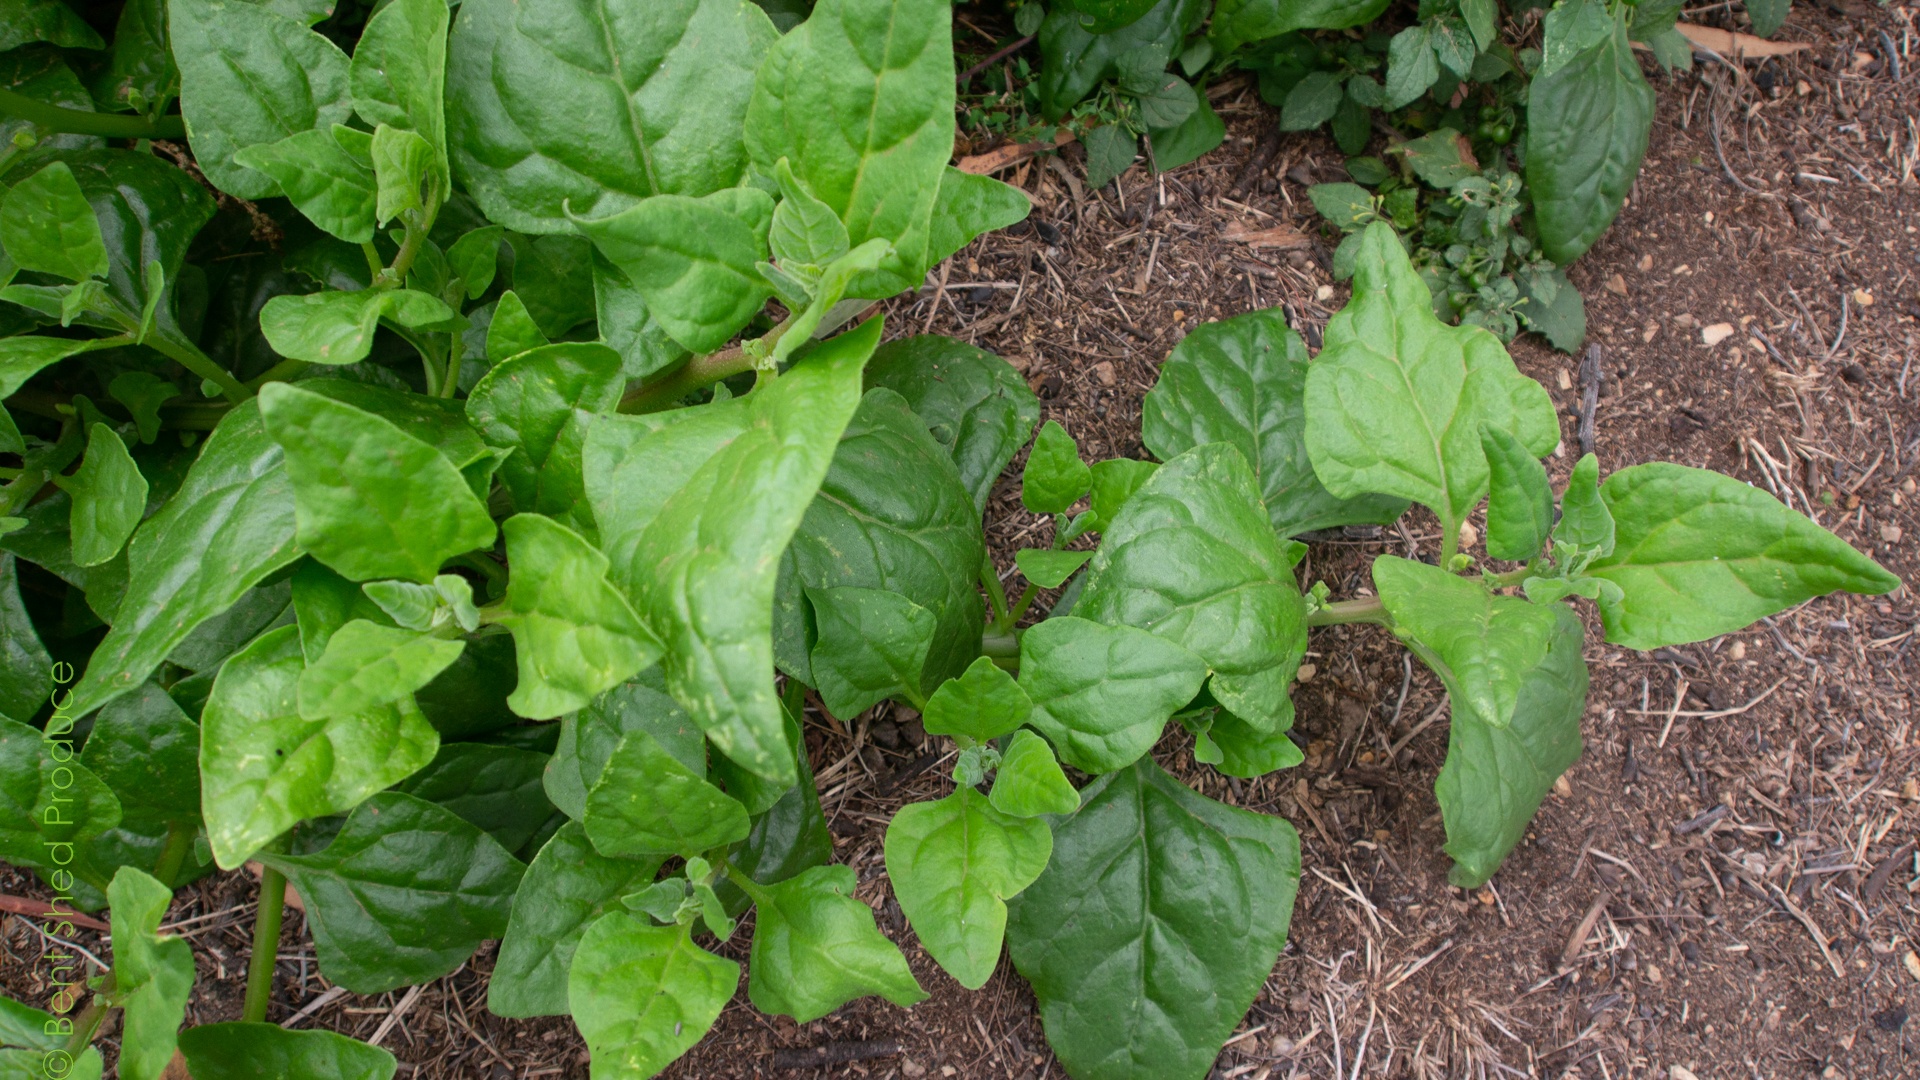 Green, arrow-shaped leaves with prominent veins display against a brown background